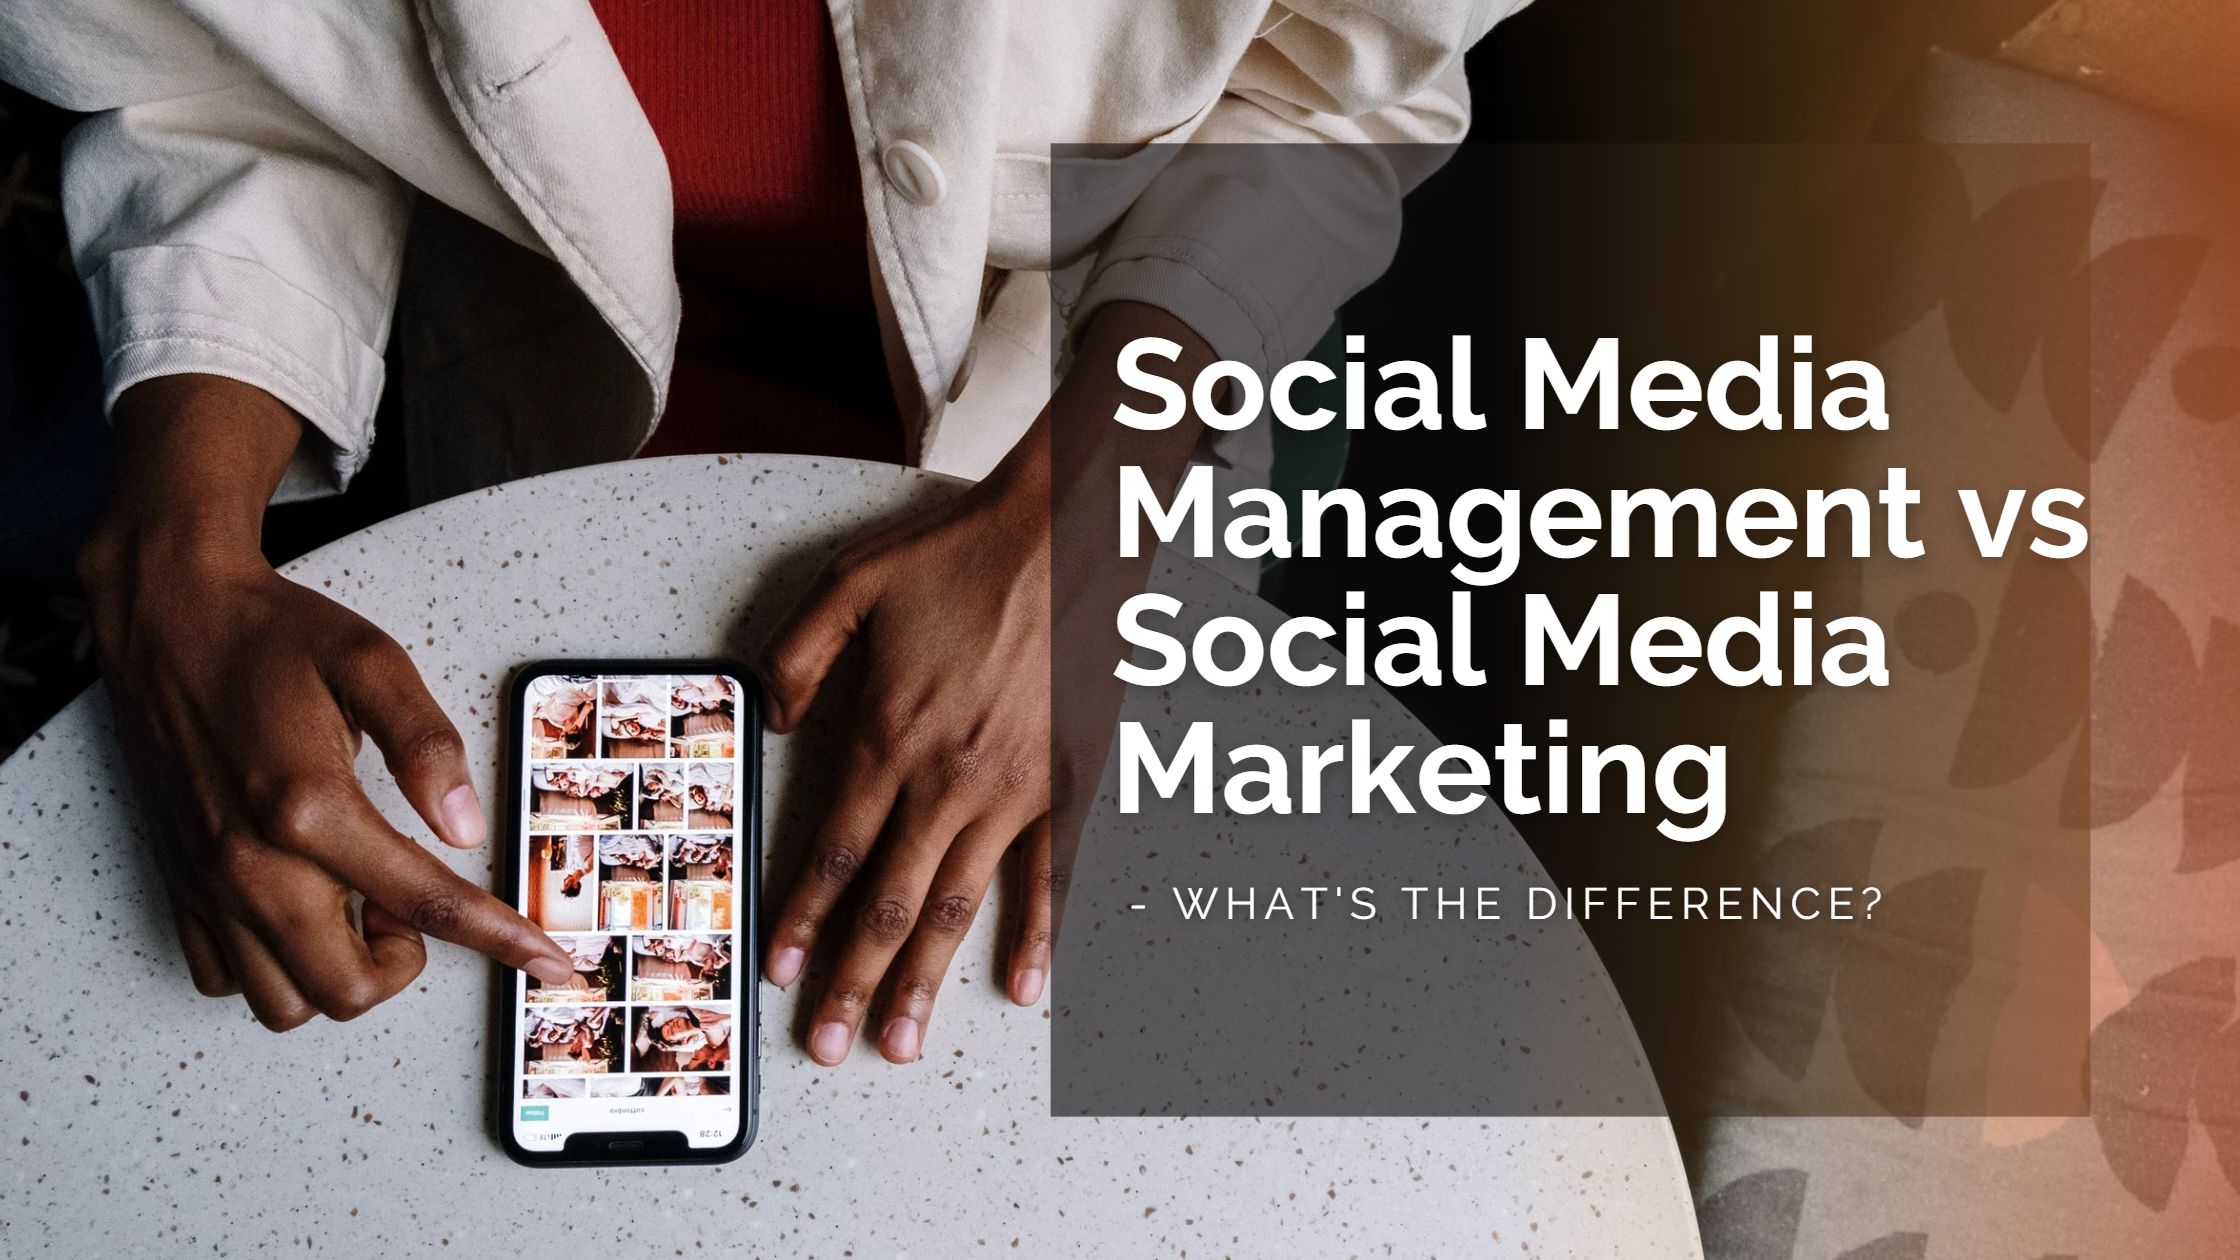 Social Media Management vs Social Media Marketing - What's the Difference?